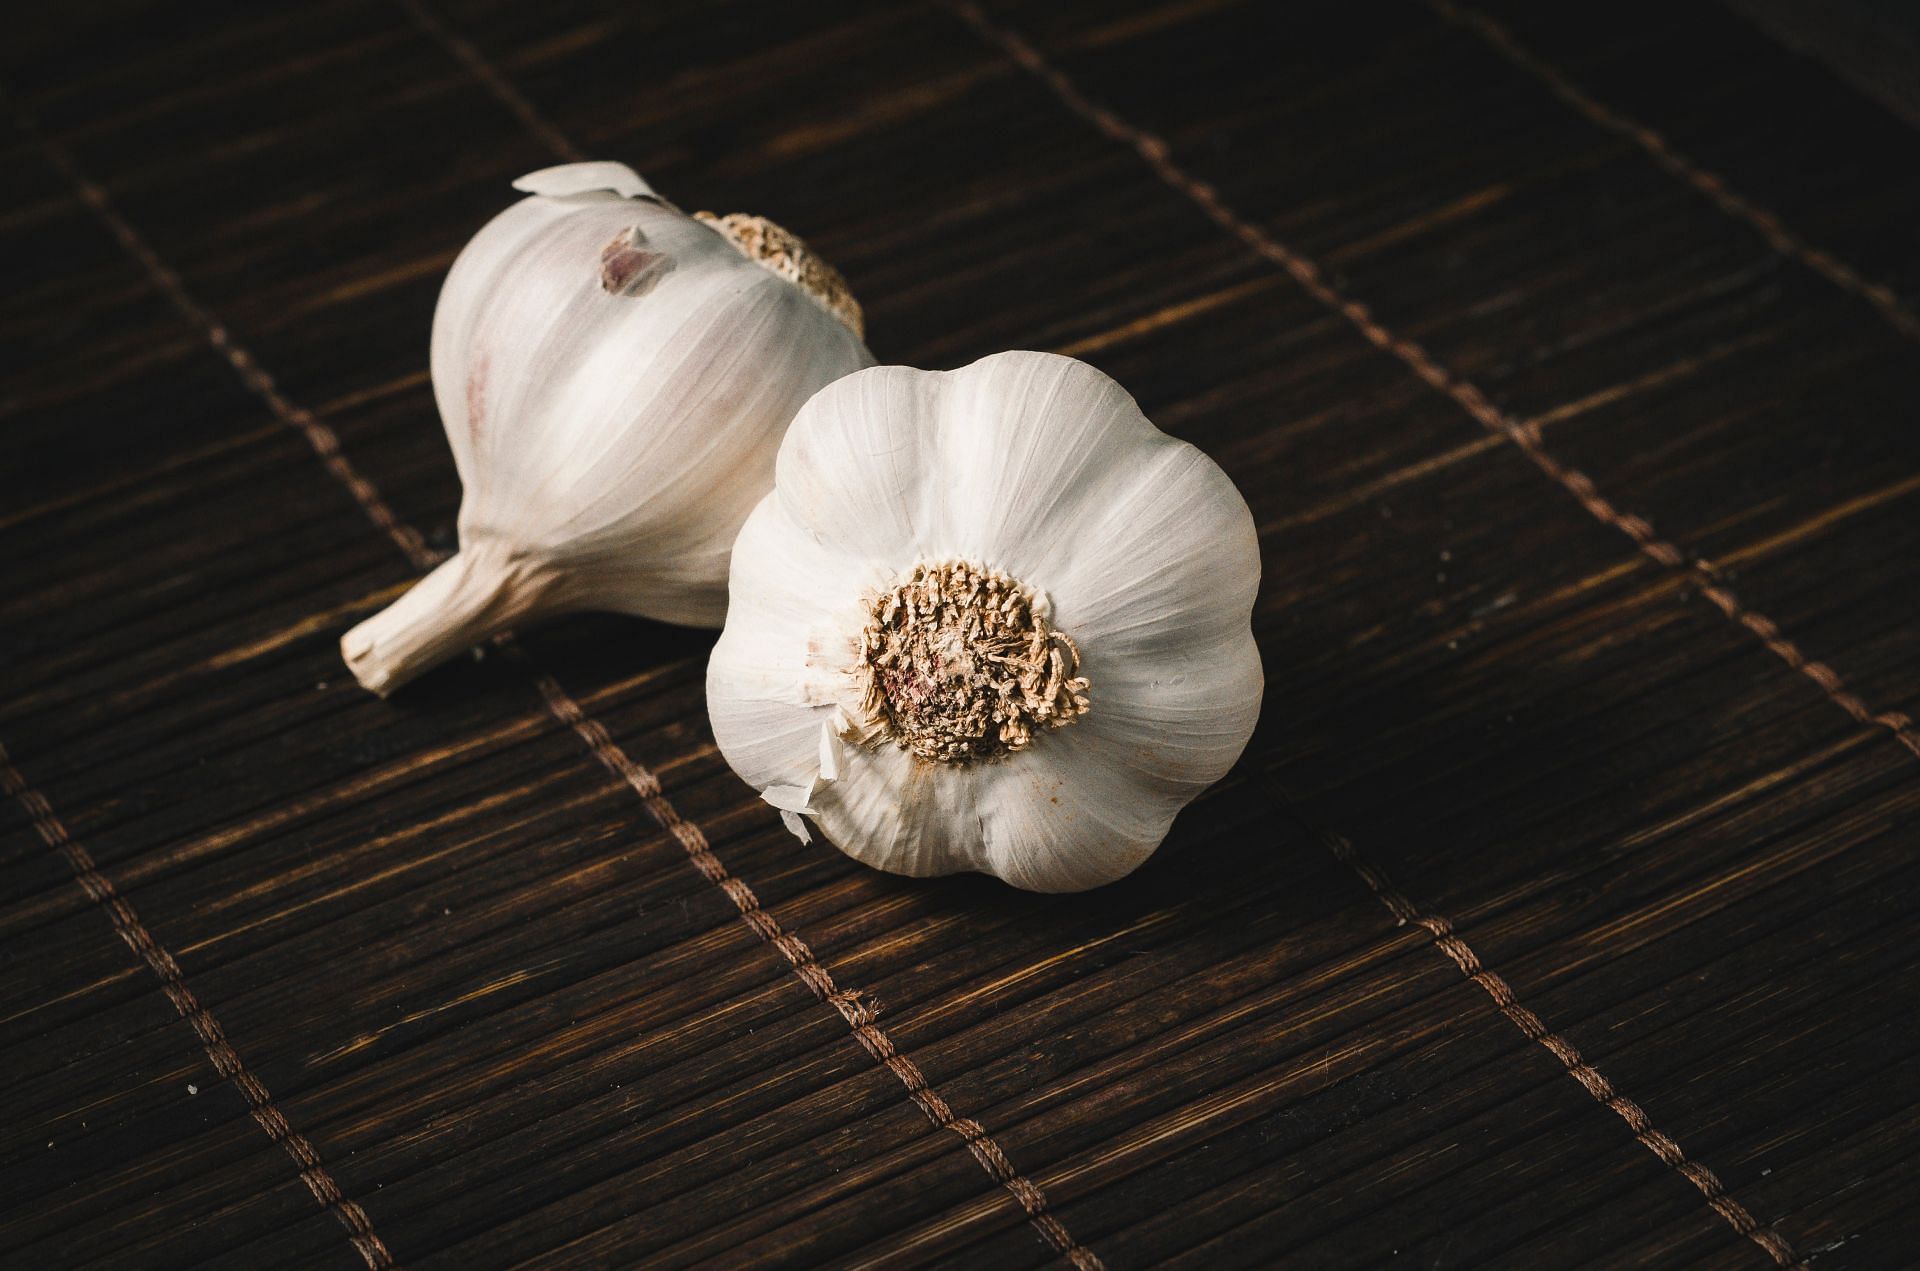 Stinky breath due to garlic (image sourced via Pexels / Photo by Isabella)